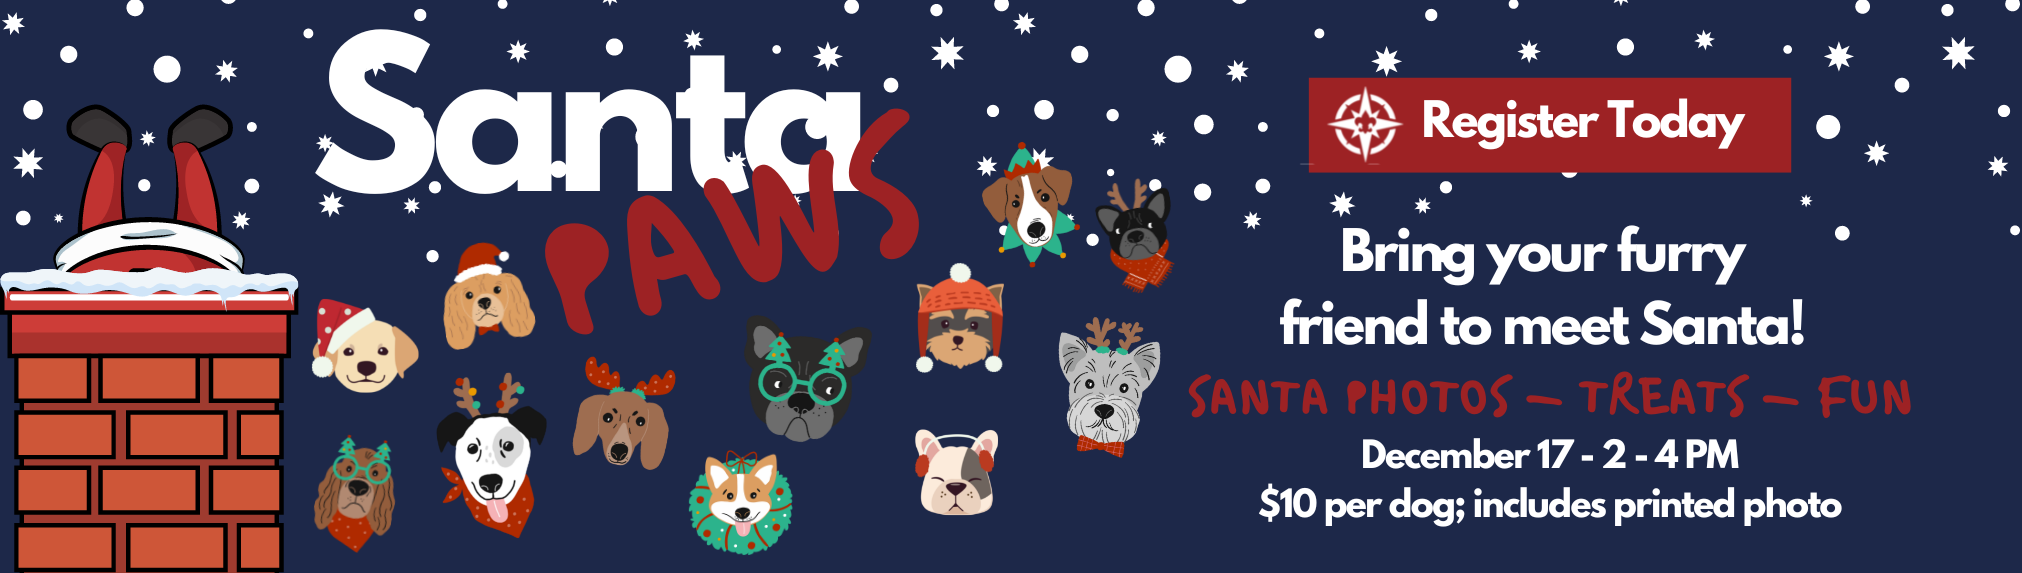 New this year - Santa Paws! Bring your furry friend to meet Santa. We'll have a place for photos with Santa, treats, and fun on December 17th from 2 p.m. to 4 p.m. The price is $10 per dog, which includes a printed photo.